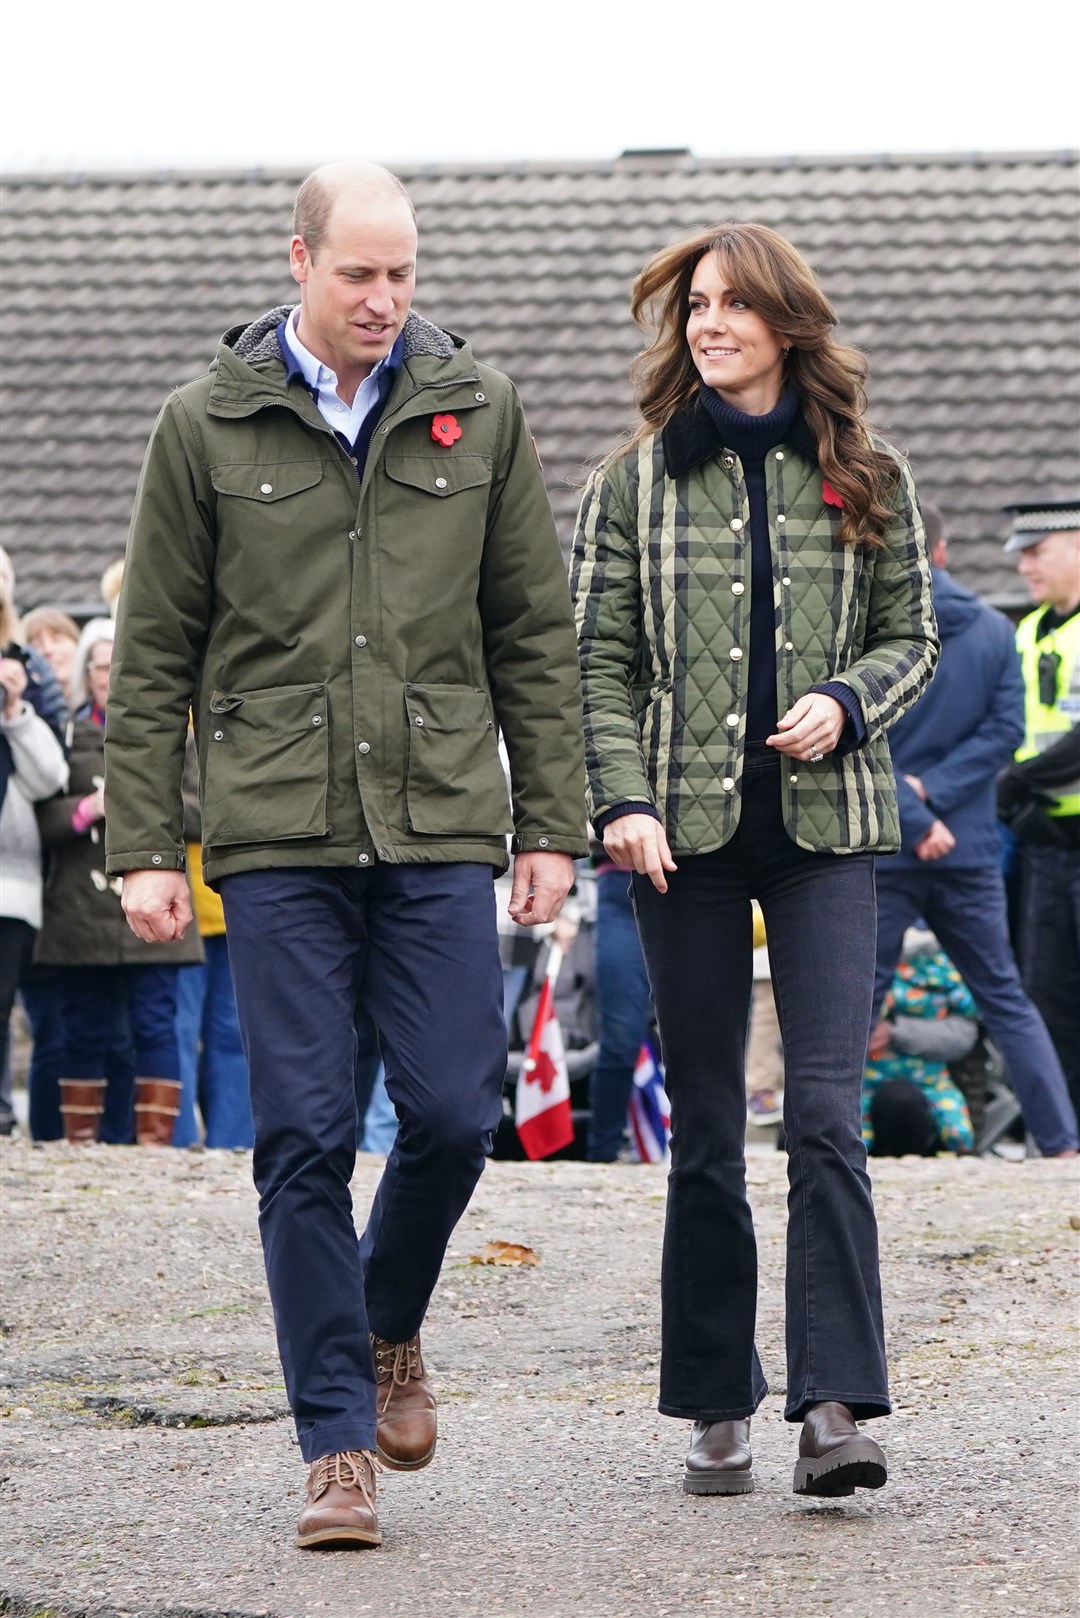 The couple were dressed casually for the visit (Jane Barlow/PA)